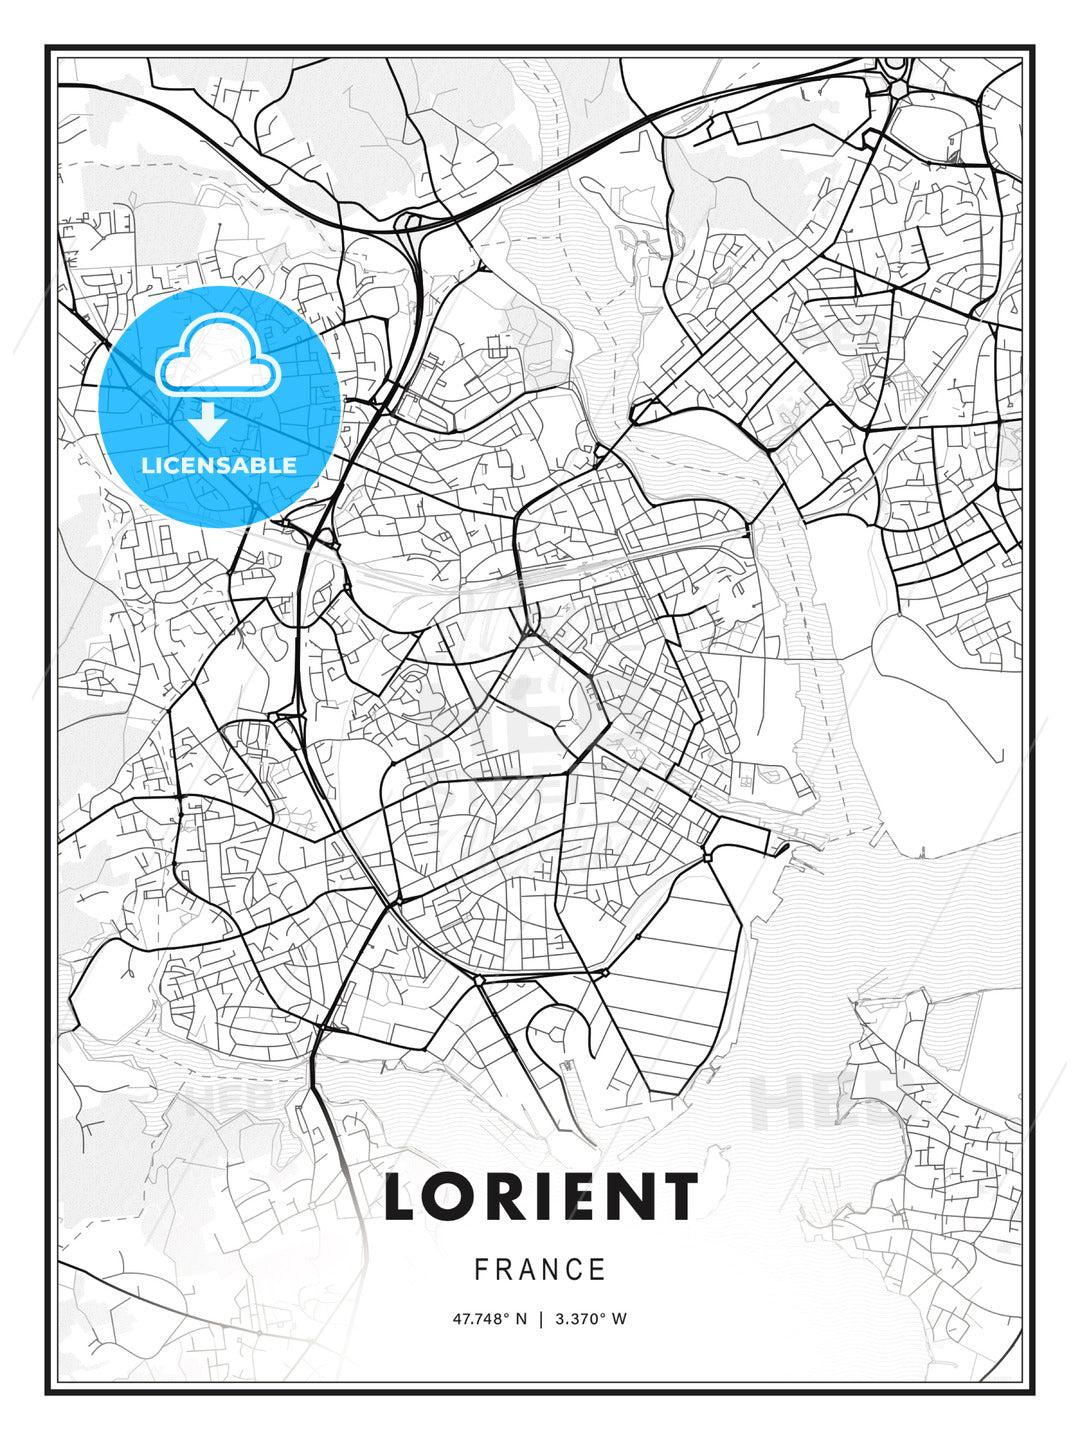 Lorient, France, Modern Print Template in Various Formats - HEBSTREITS Sketches